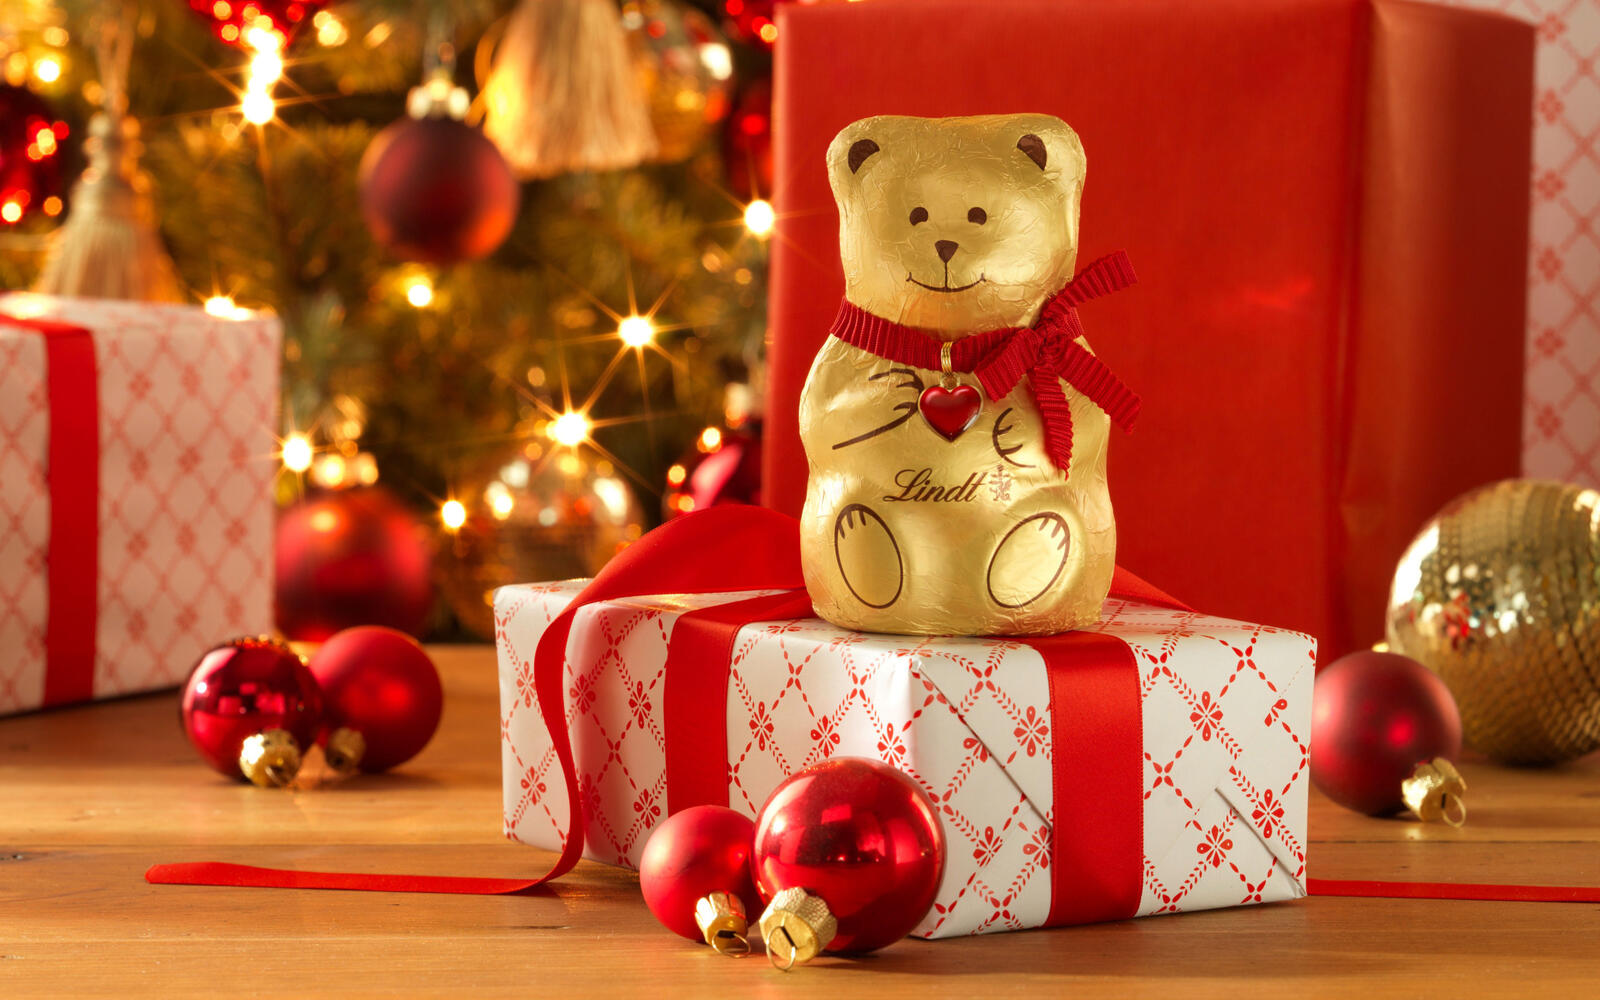 Free photo A New Year`s gift with a teddy bear